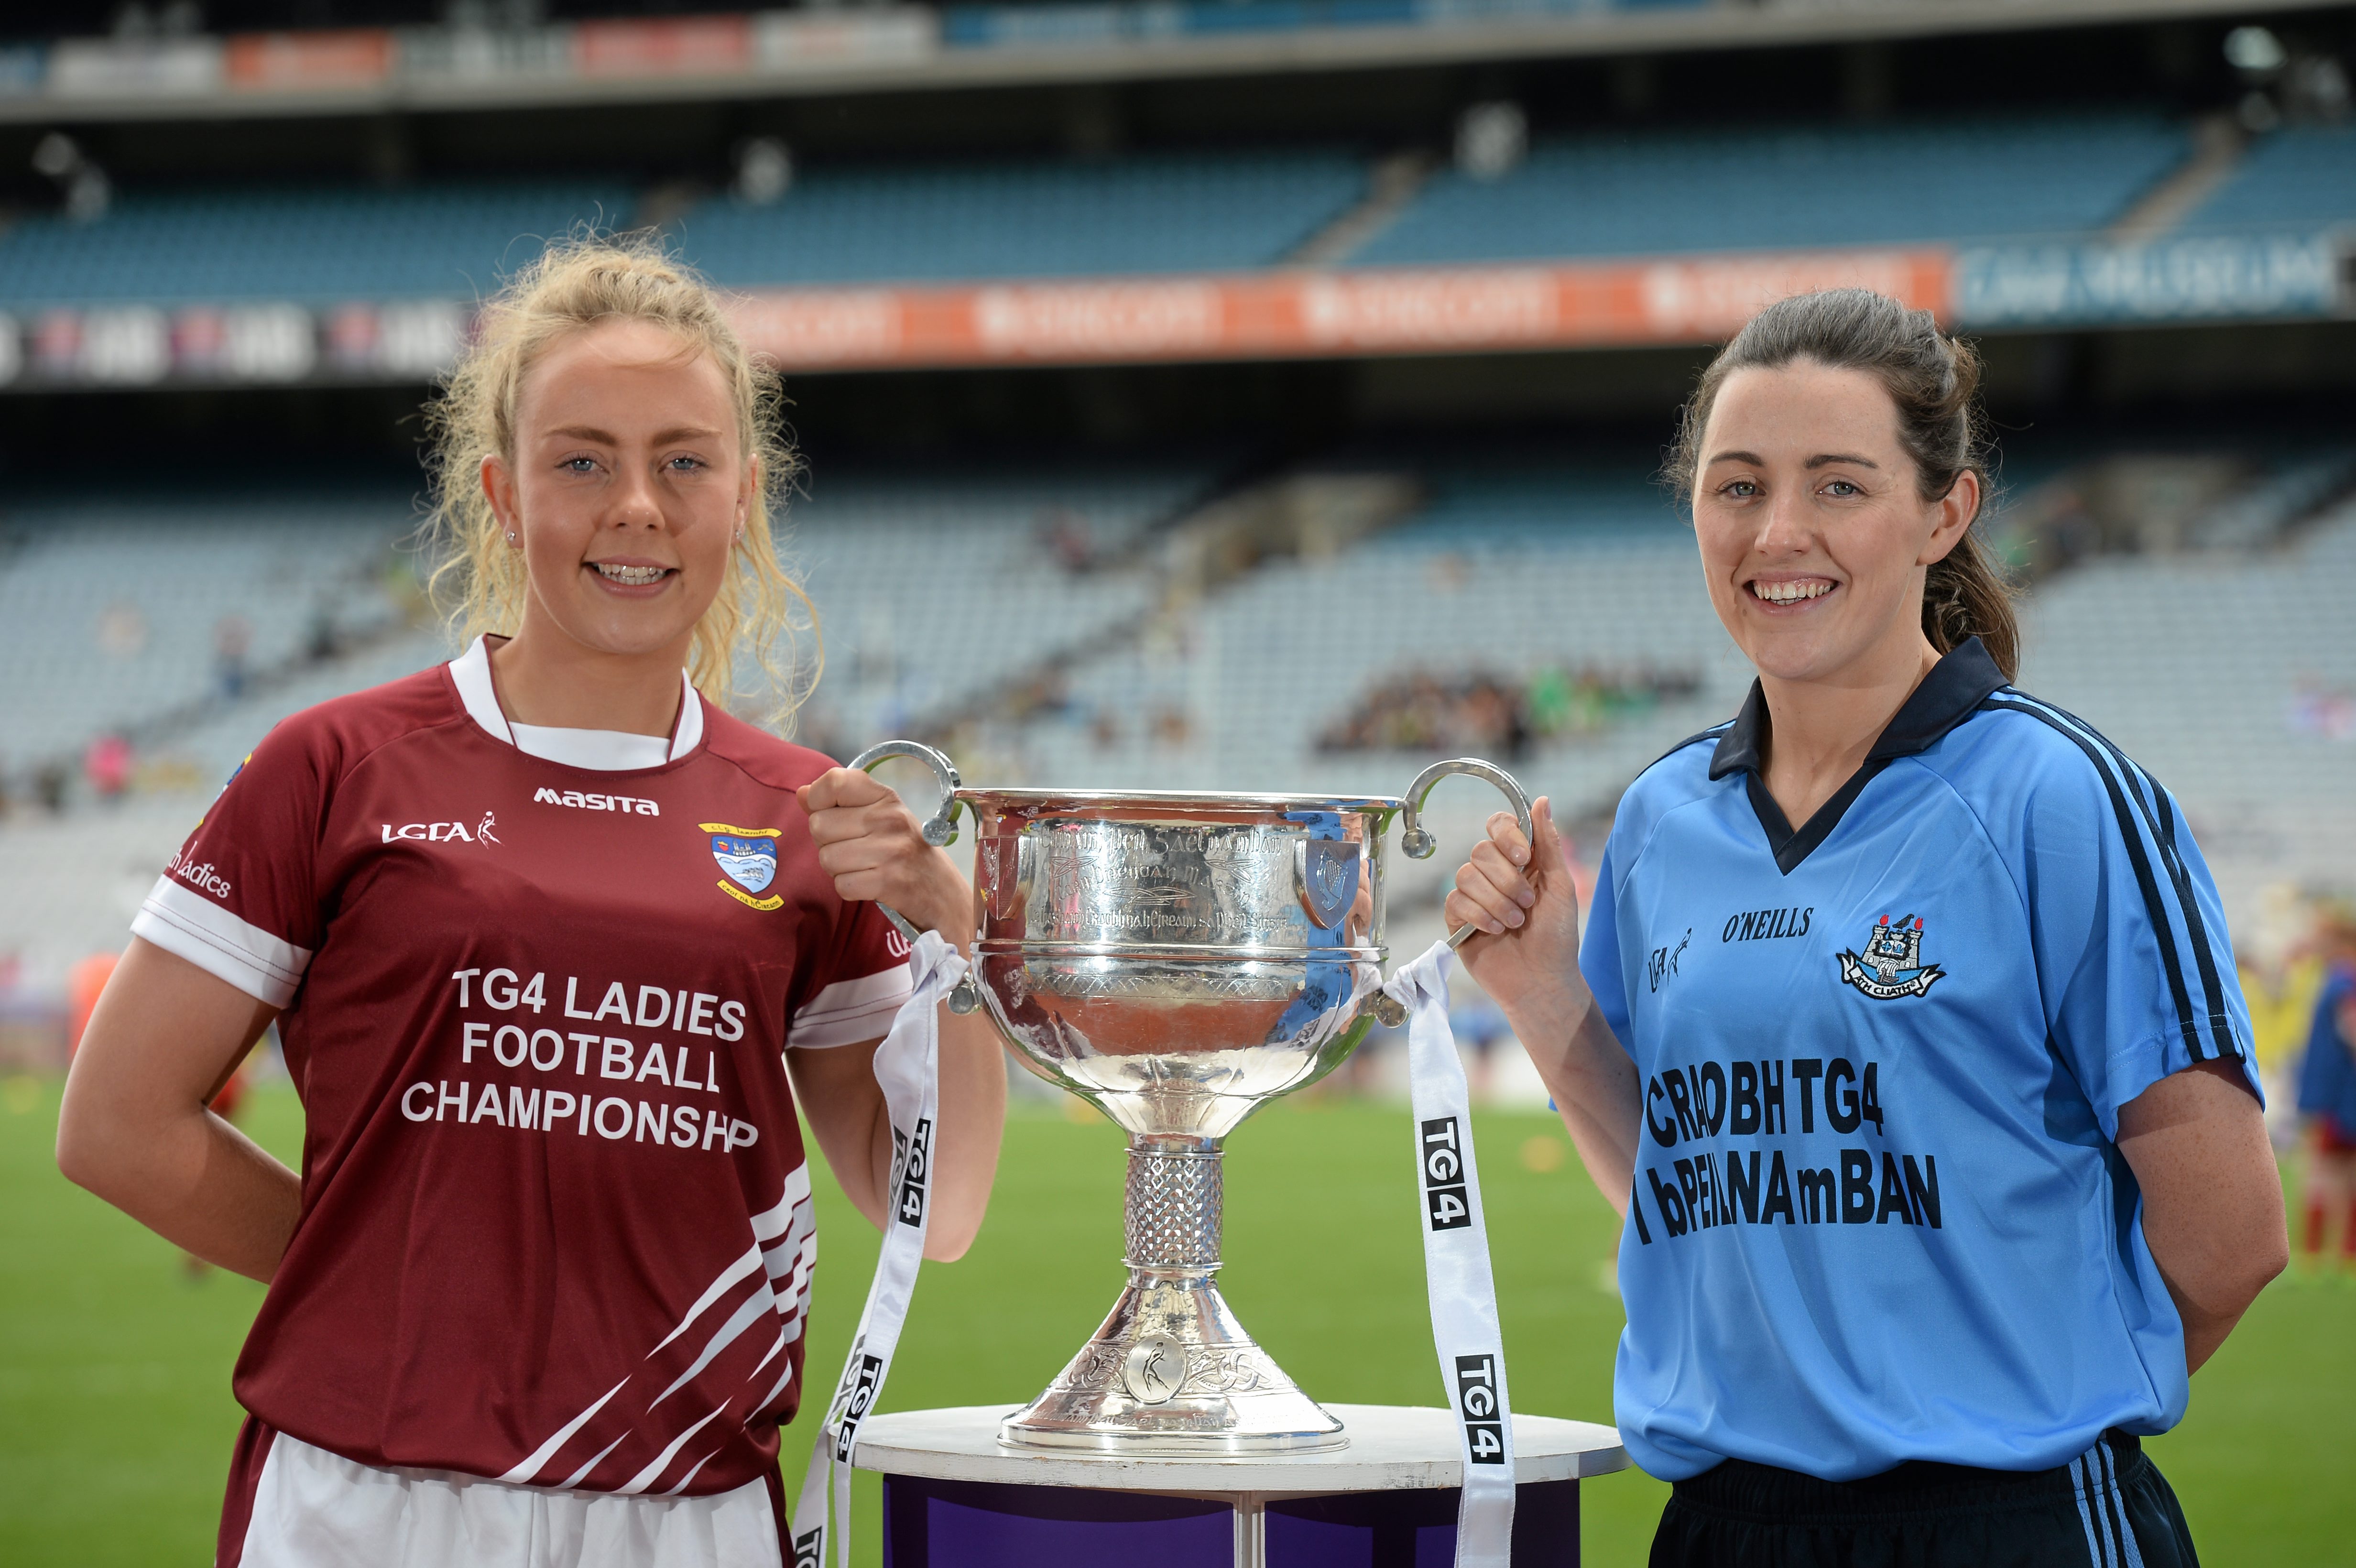 6 July 2015; Pictured at the launch of the TG4 Ladies All Ireland Senior Football Championship are Jennifer Rogers, Westmeath, left, and Lyndsey Davey, Dublin. The championship, which begins with the first matches on July 25th will culminate with the TG4 All Ireland Finals in Croke Park on September 27th. Cork will hope to win tenth third All Ireland title in 11 years but will face the highest level of competition in years. All supporters of the sport are being asked to support the championship, to Be the Difference, Be There #BetheDiff. Croke Park, Dublin. Picture credit: Piaras Ó Mídheach / SPORTSFILE *** NO REPRODUCTION FEE ***